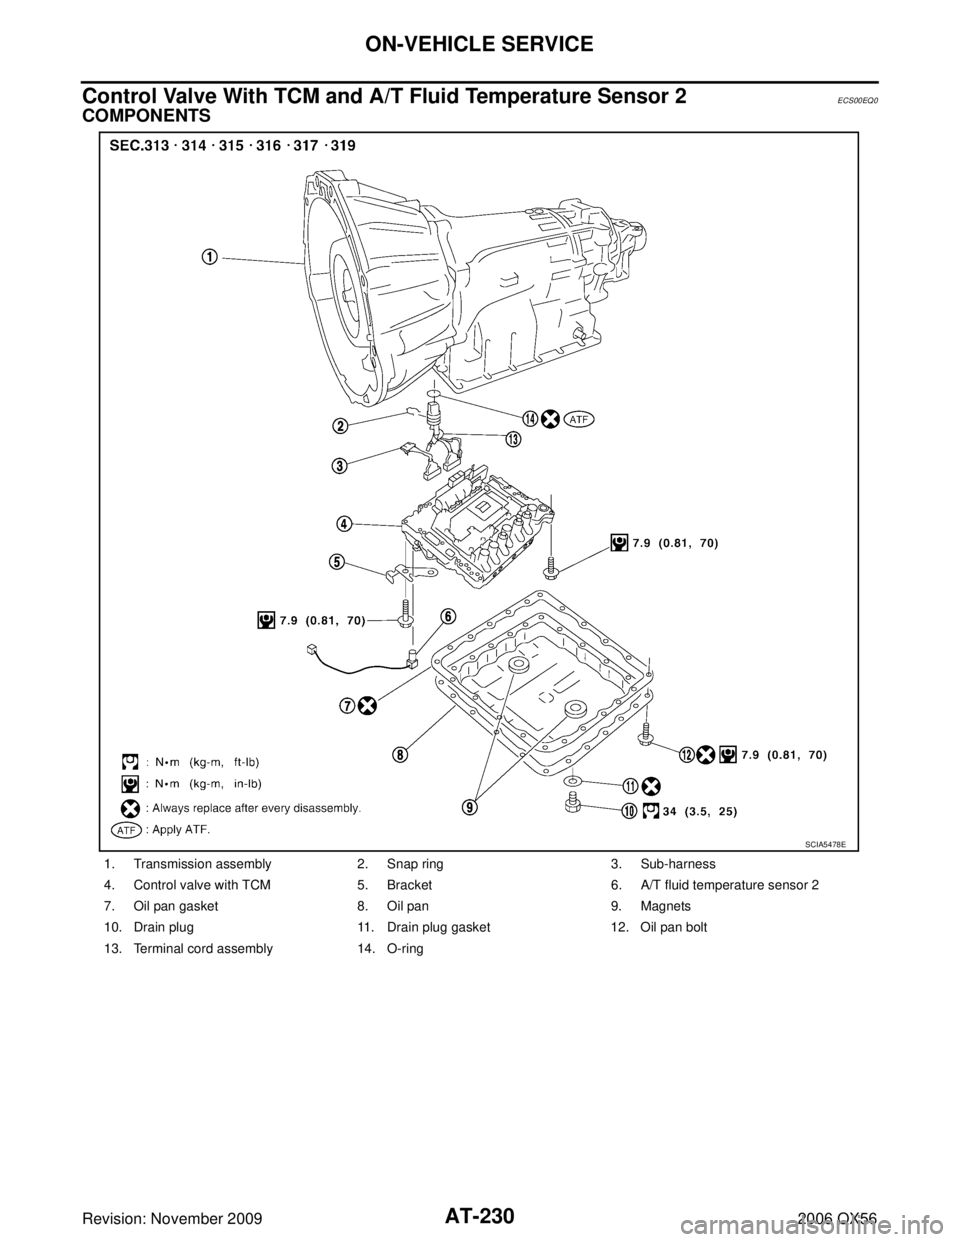 INFINITI QX56 2006  Factory Service Manual AT-230
ON-VEHICLE SERVICE
Revision: November 20092006 QX56
Control Valve With TCM and A/T Fluid Temperature Sensor 2ECS00EQ0
COMPONENTS
1. Transmission assembly2. Snap ring 3. Sub-harness
4. Control v